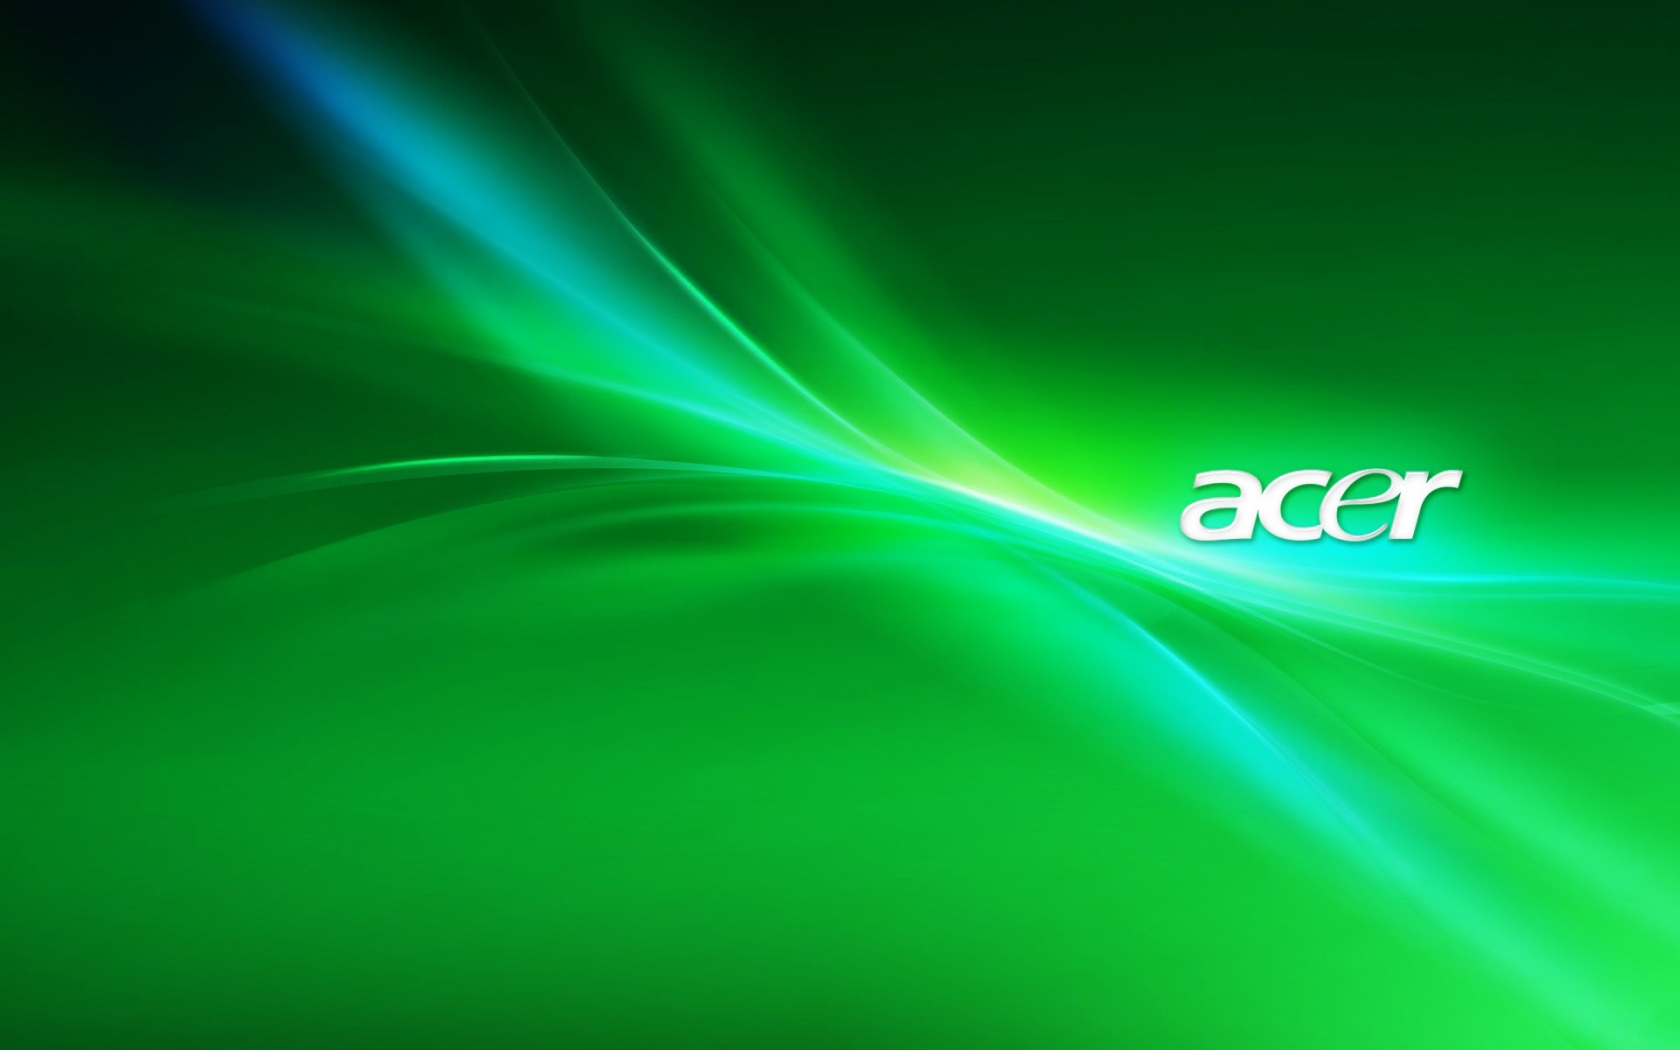 Acer Green for 1680 x 1050 widescreen resolution